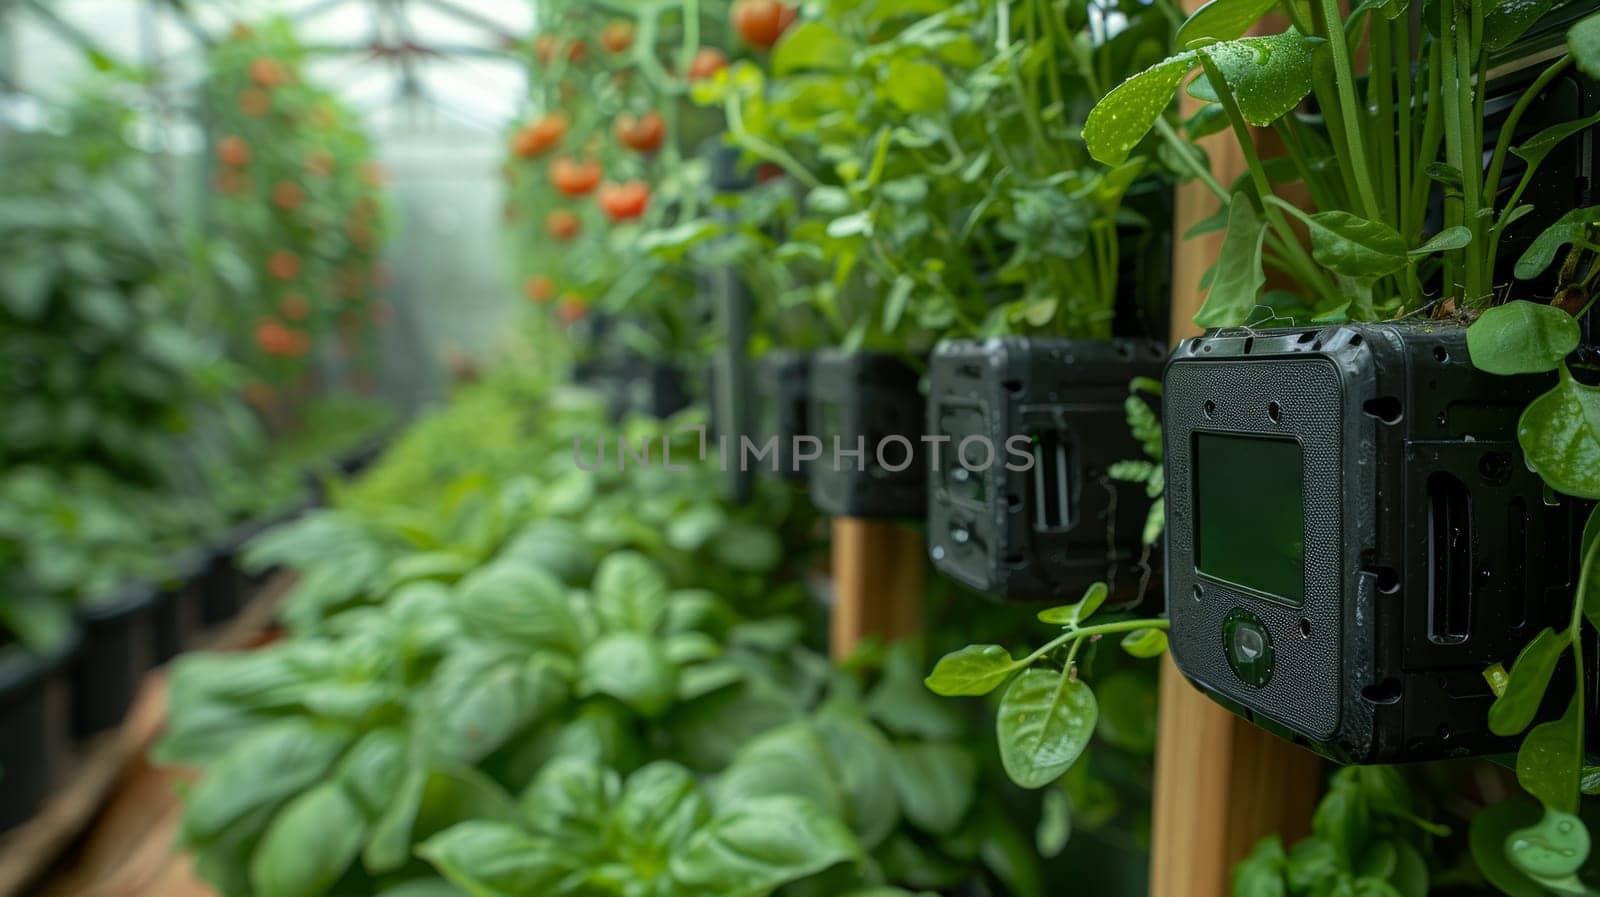 Hydroponic Farm Technology. Monitoring Sensors, Automation, and Vertical Gardens for Sustainable Agriculture